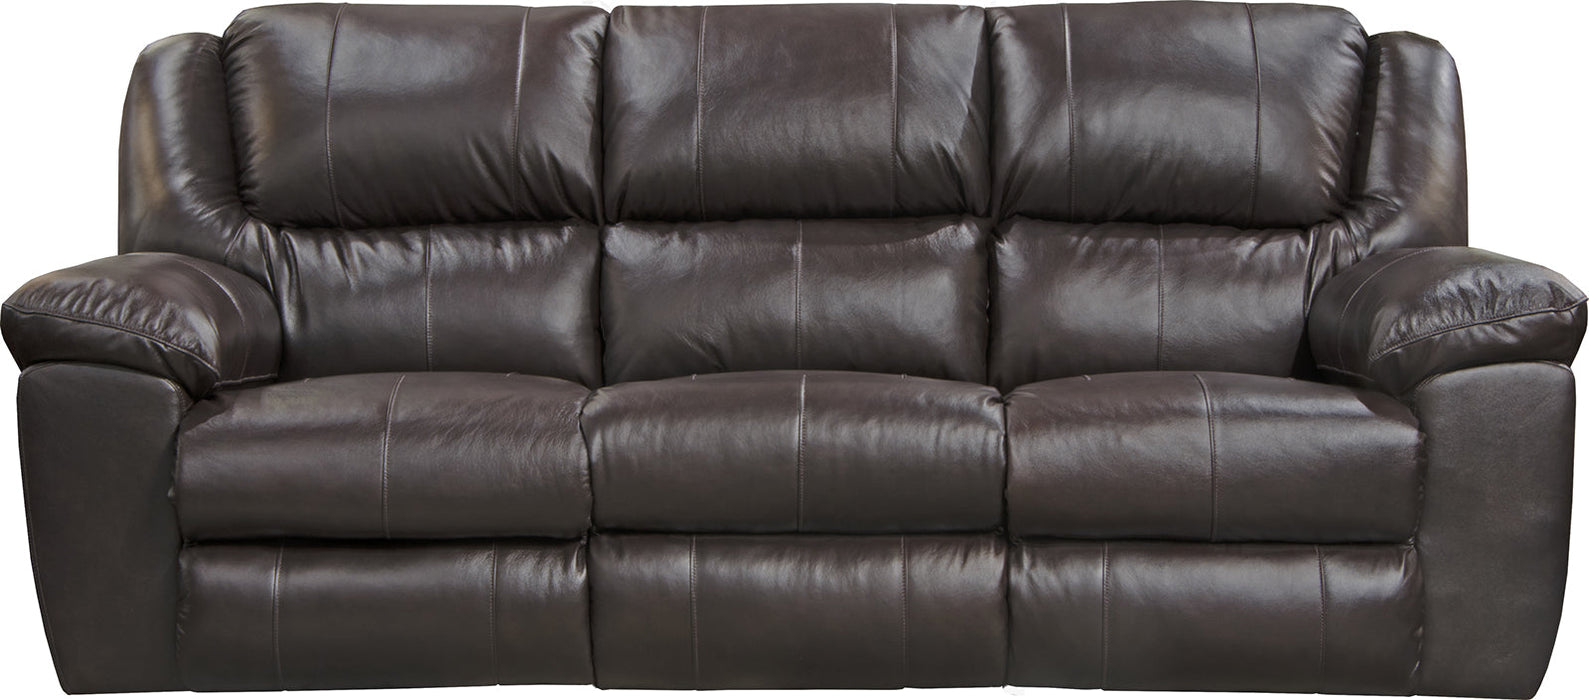 Catnapper Furniture Transformer II Power Ultimate Sofa with 3 Recliners and Drop Down Table in Chocolate image